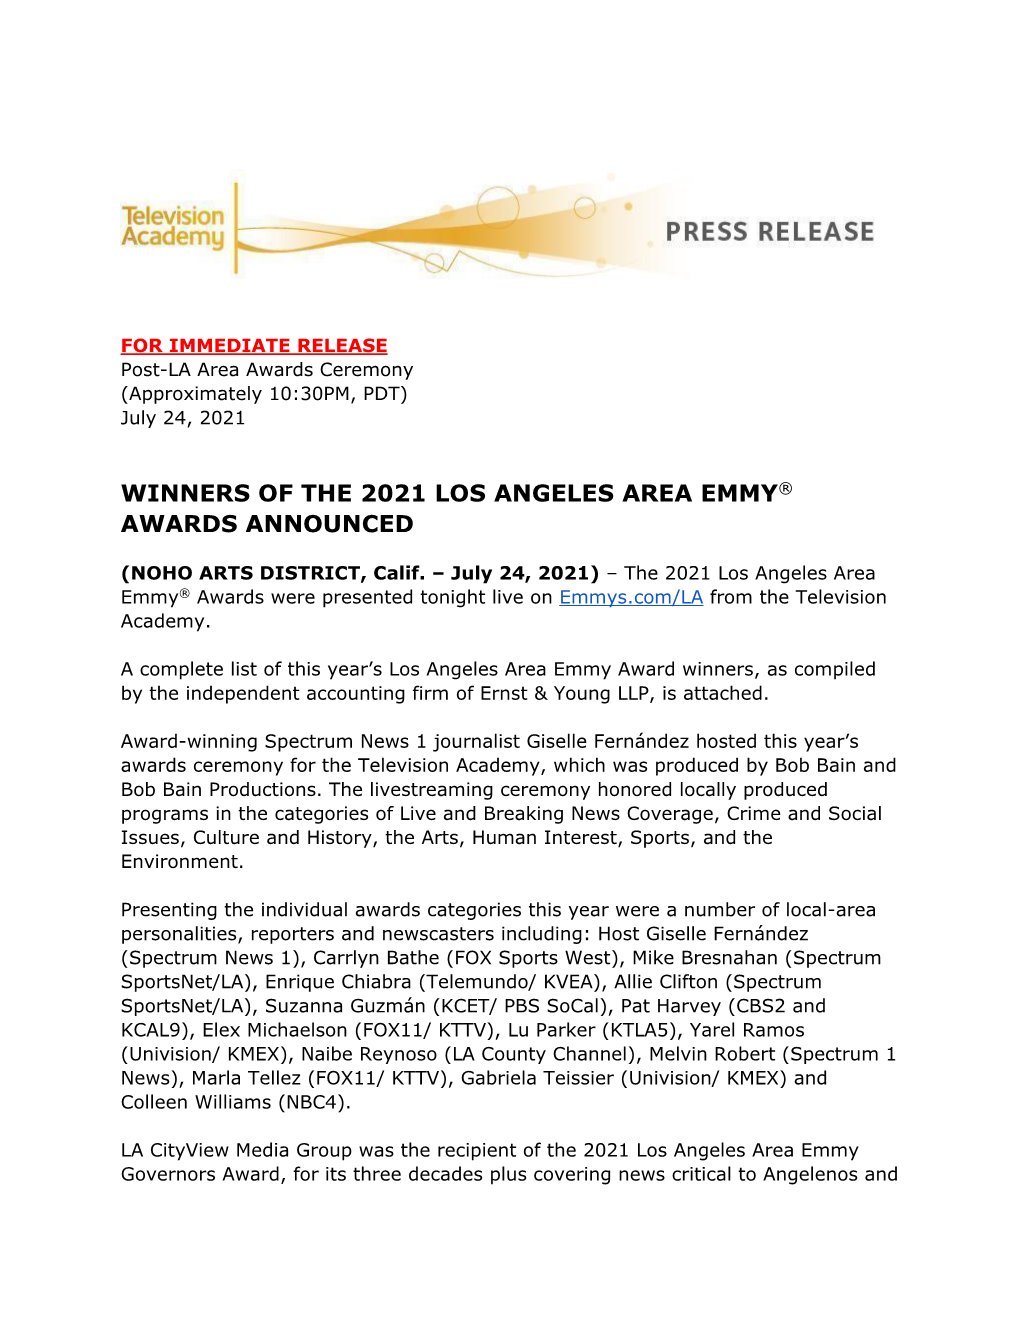 Winners of the 2021 Los Angeles Area Emmy® Awards Announced